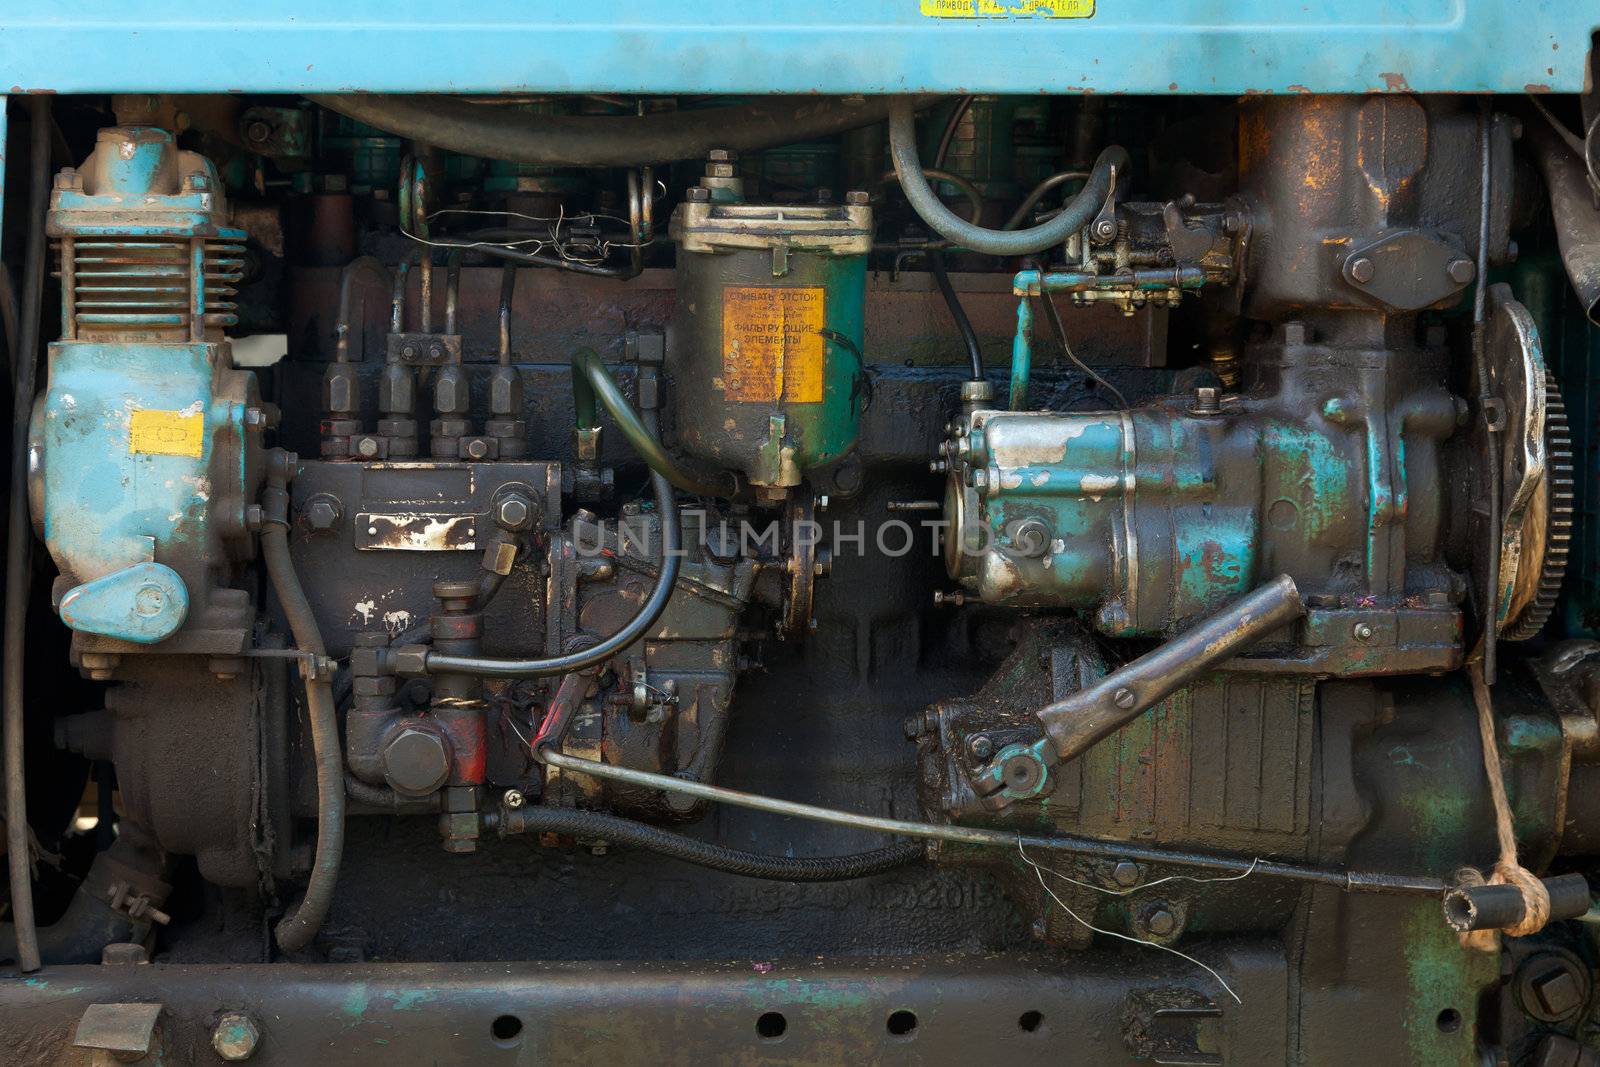 engine of the old model of agricultural tractor